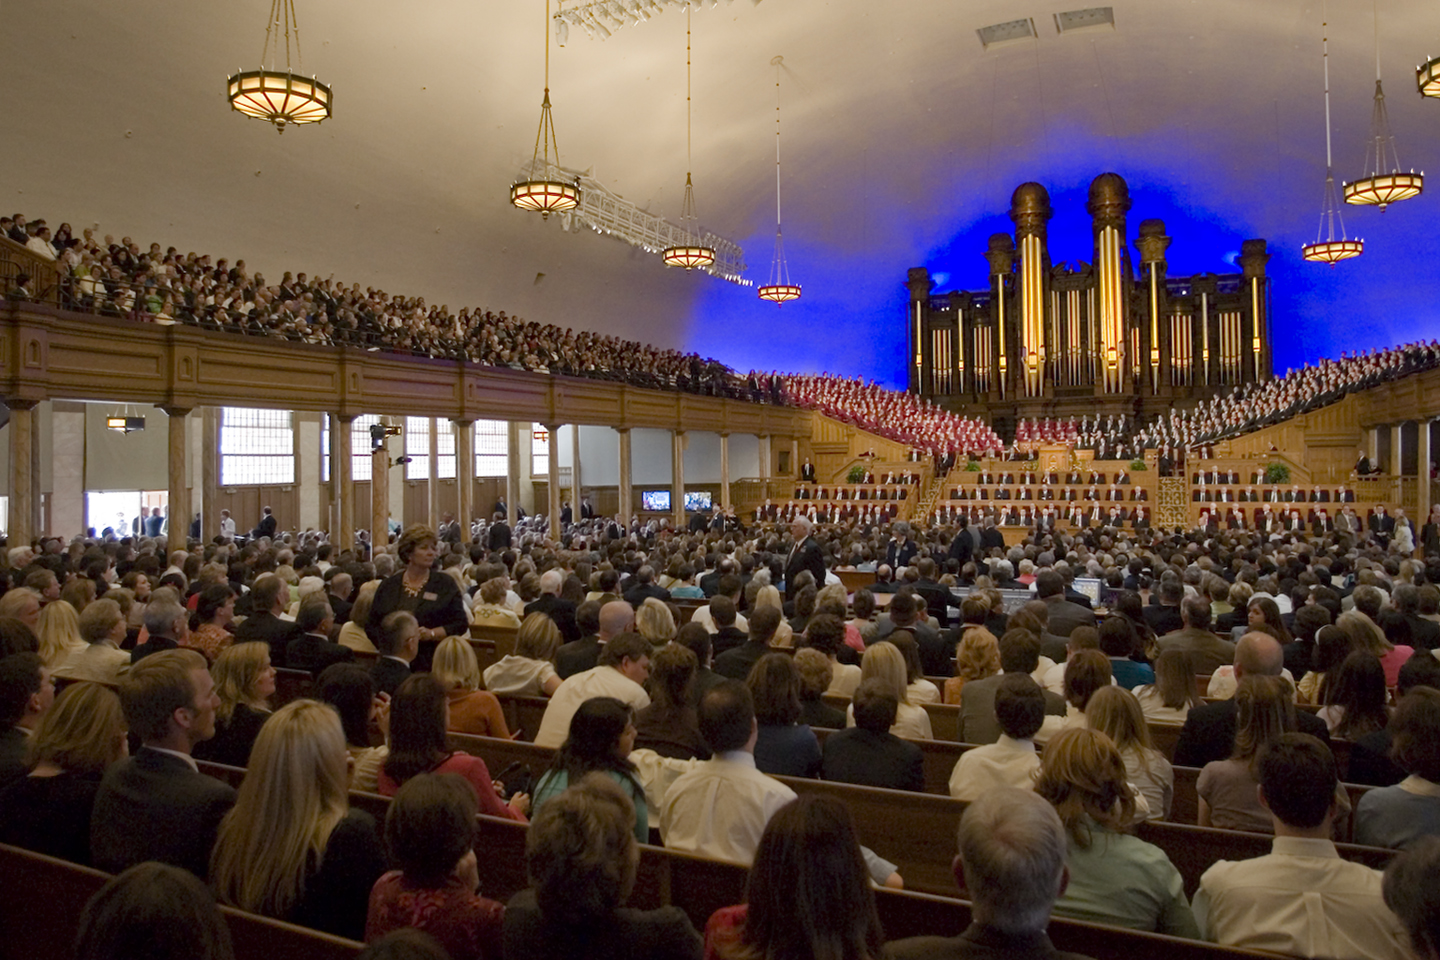 Image of General Conference. Salt Lake Tabernacle of the Church of Jesus Christ of Latter-day Saints, Salt Lake City, Utah © All photos courtesy of The Church of Jesus Christ of Latter-day Saints